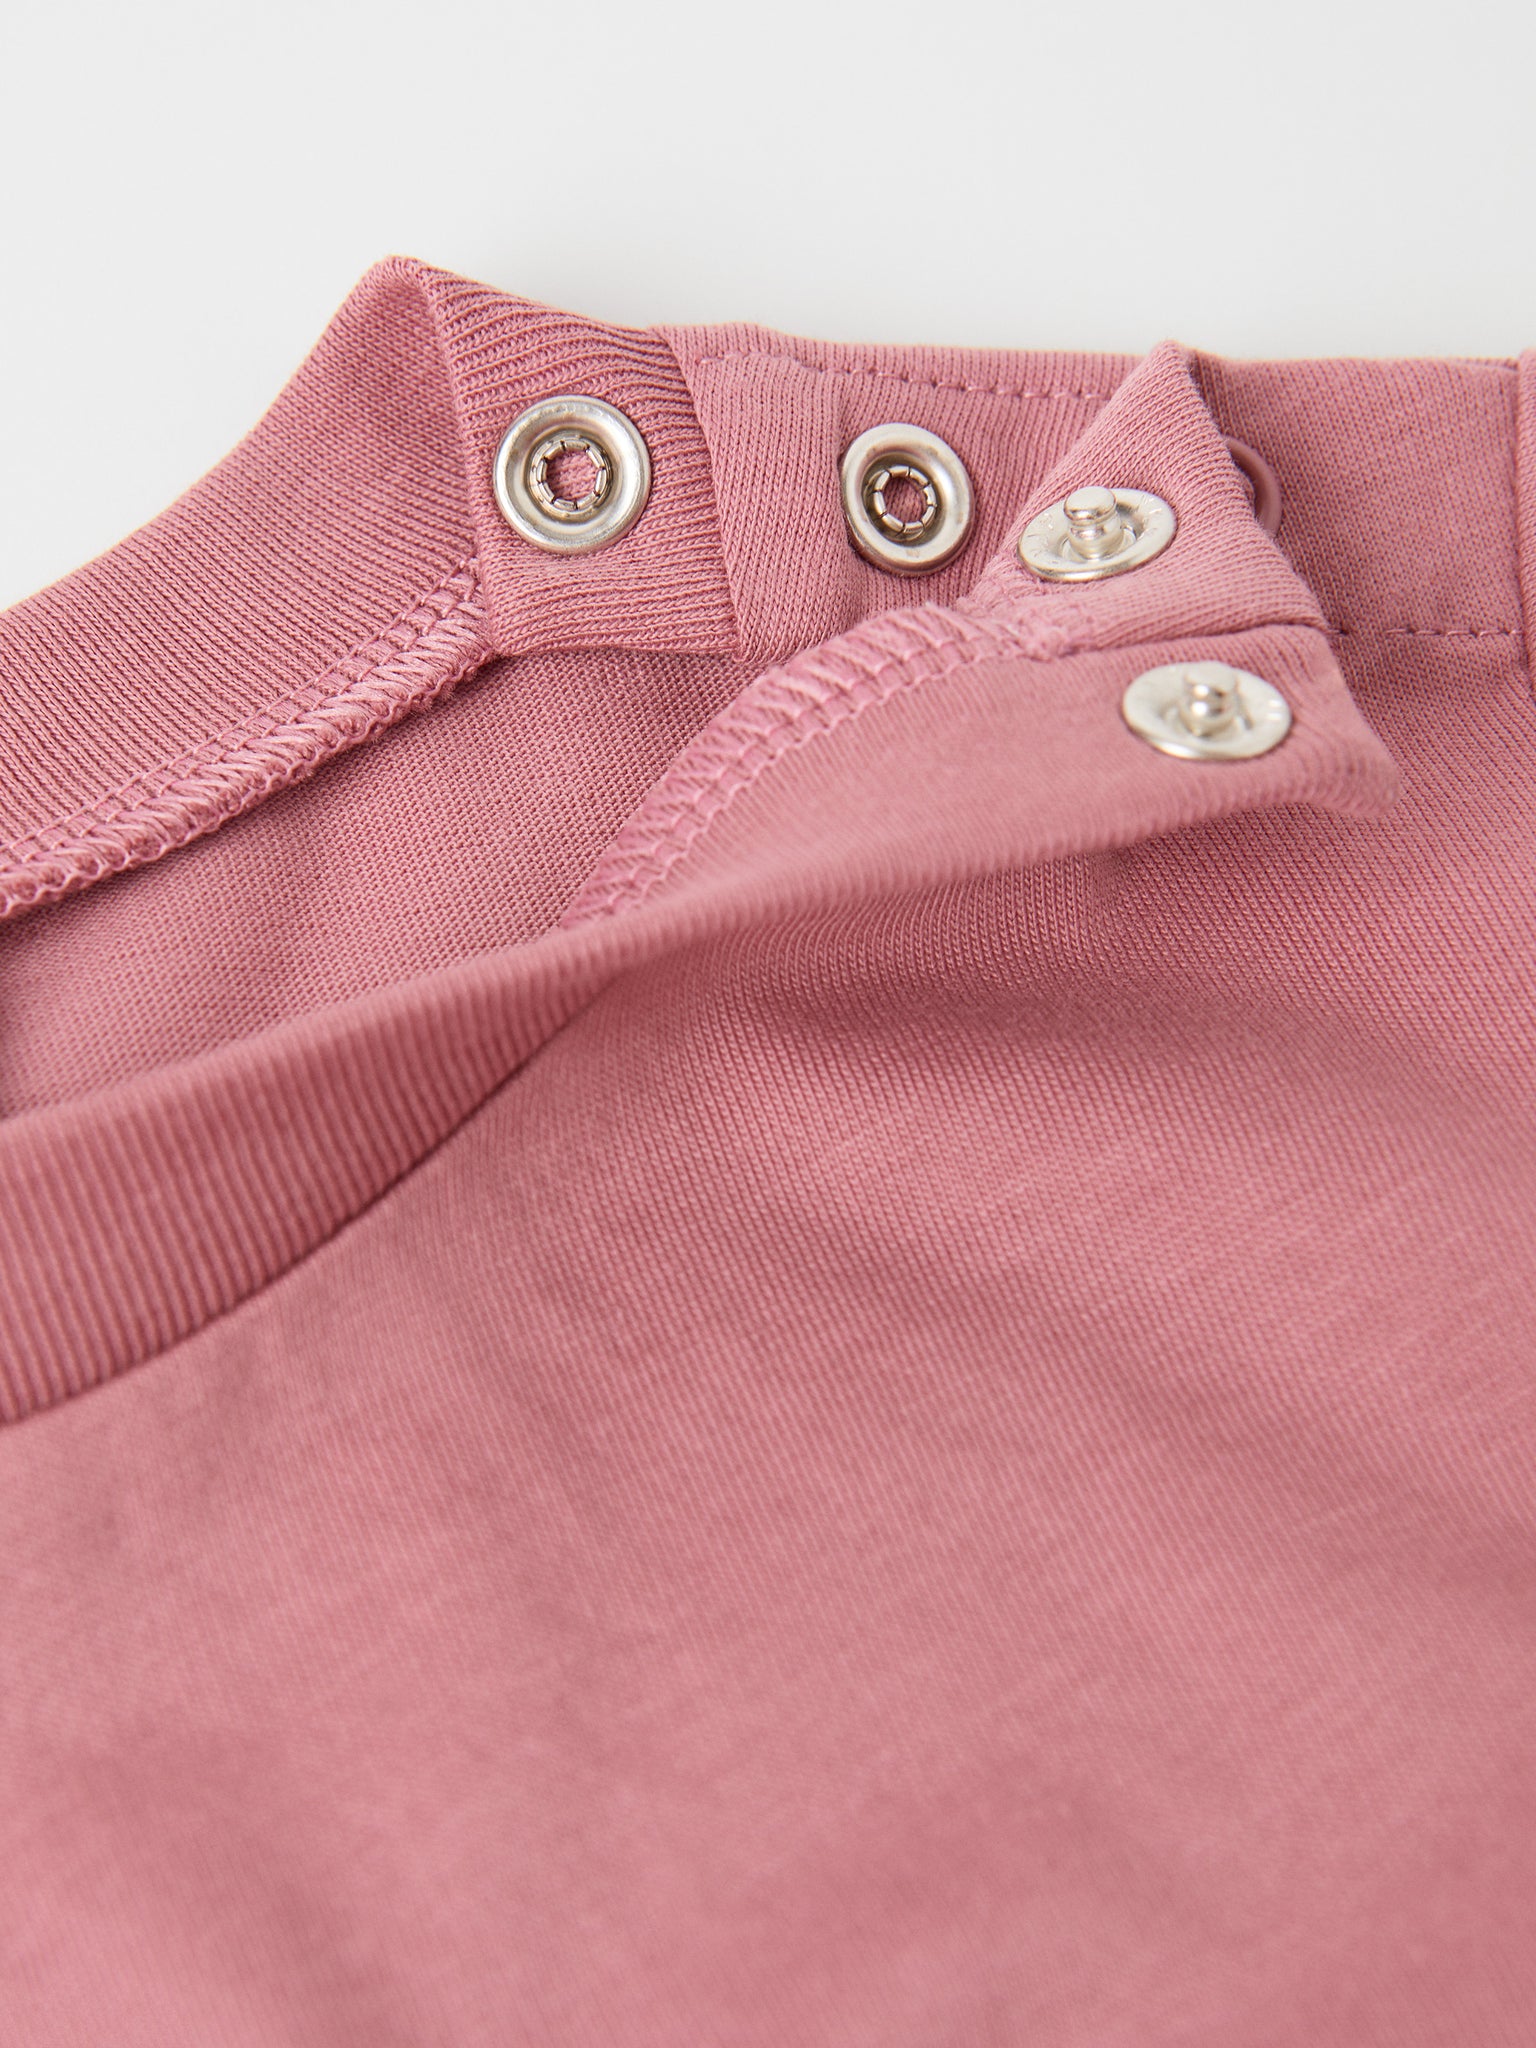 Organic Cotton Pink Kids Cat T-Shirt from the Polarn O. Pyret kidswear collection. The best ethical kids clothes